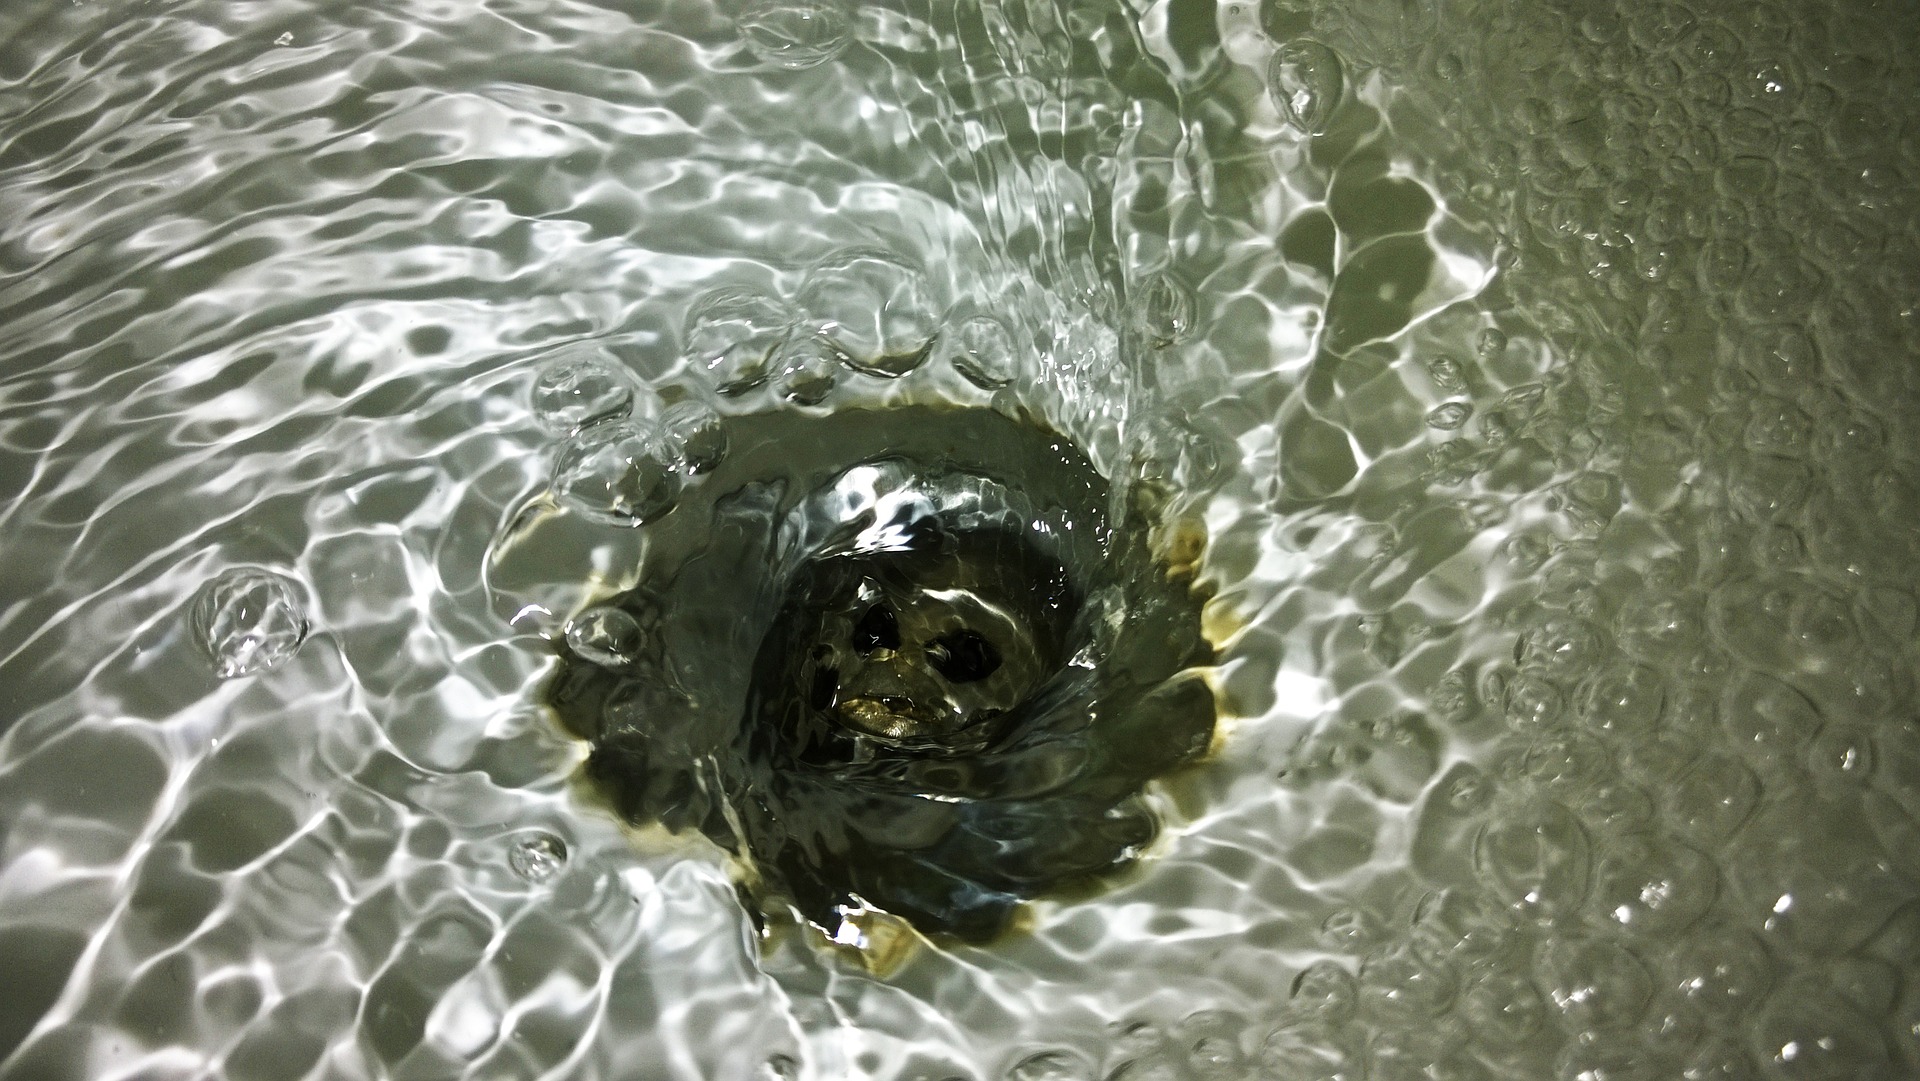 Water going down a sink drain on the One Stop Plumbing drain cleaning page